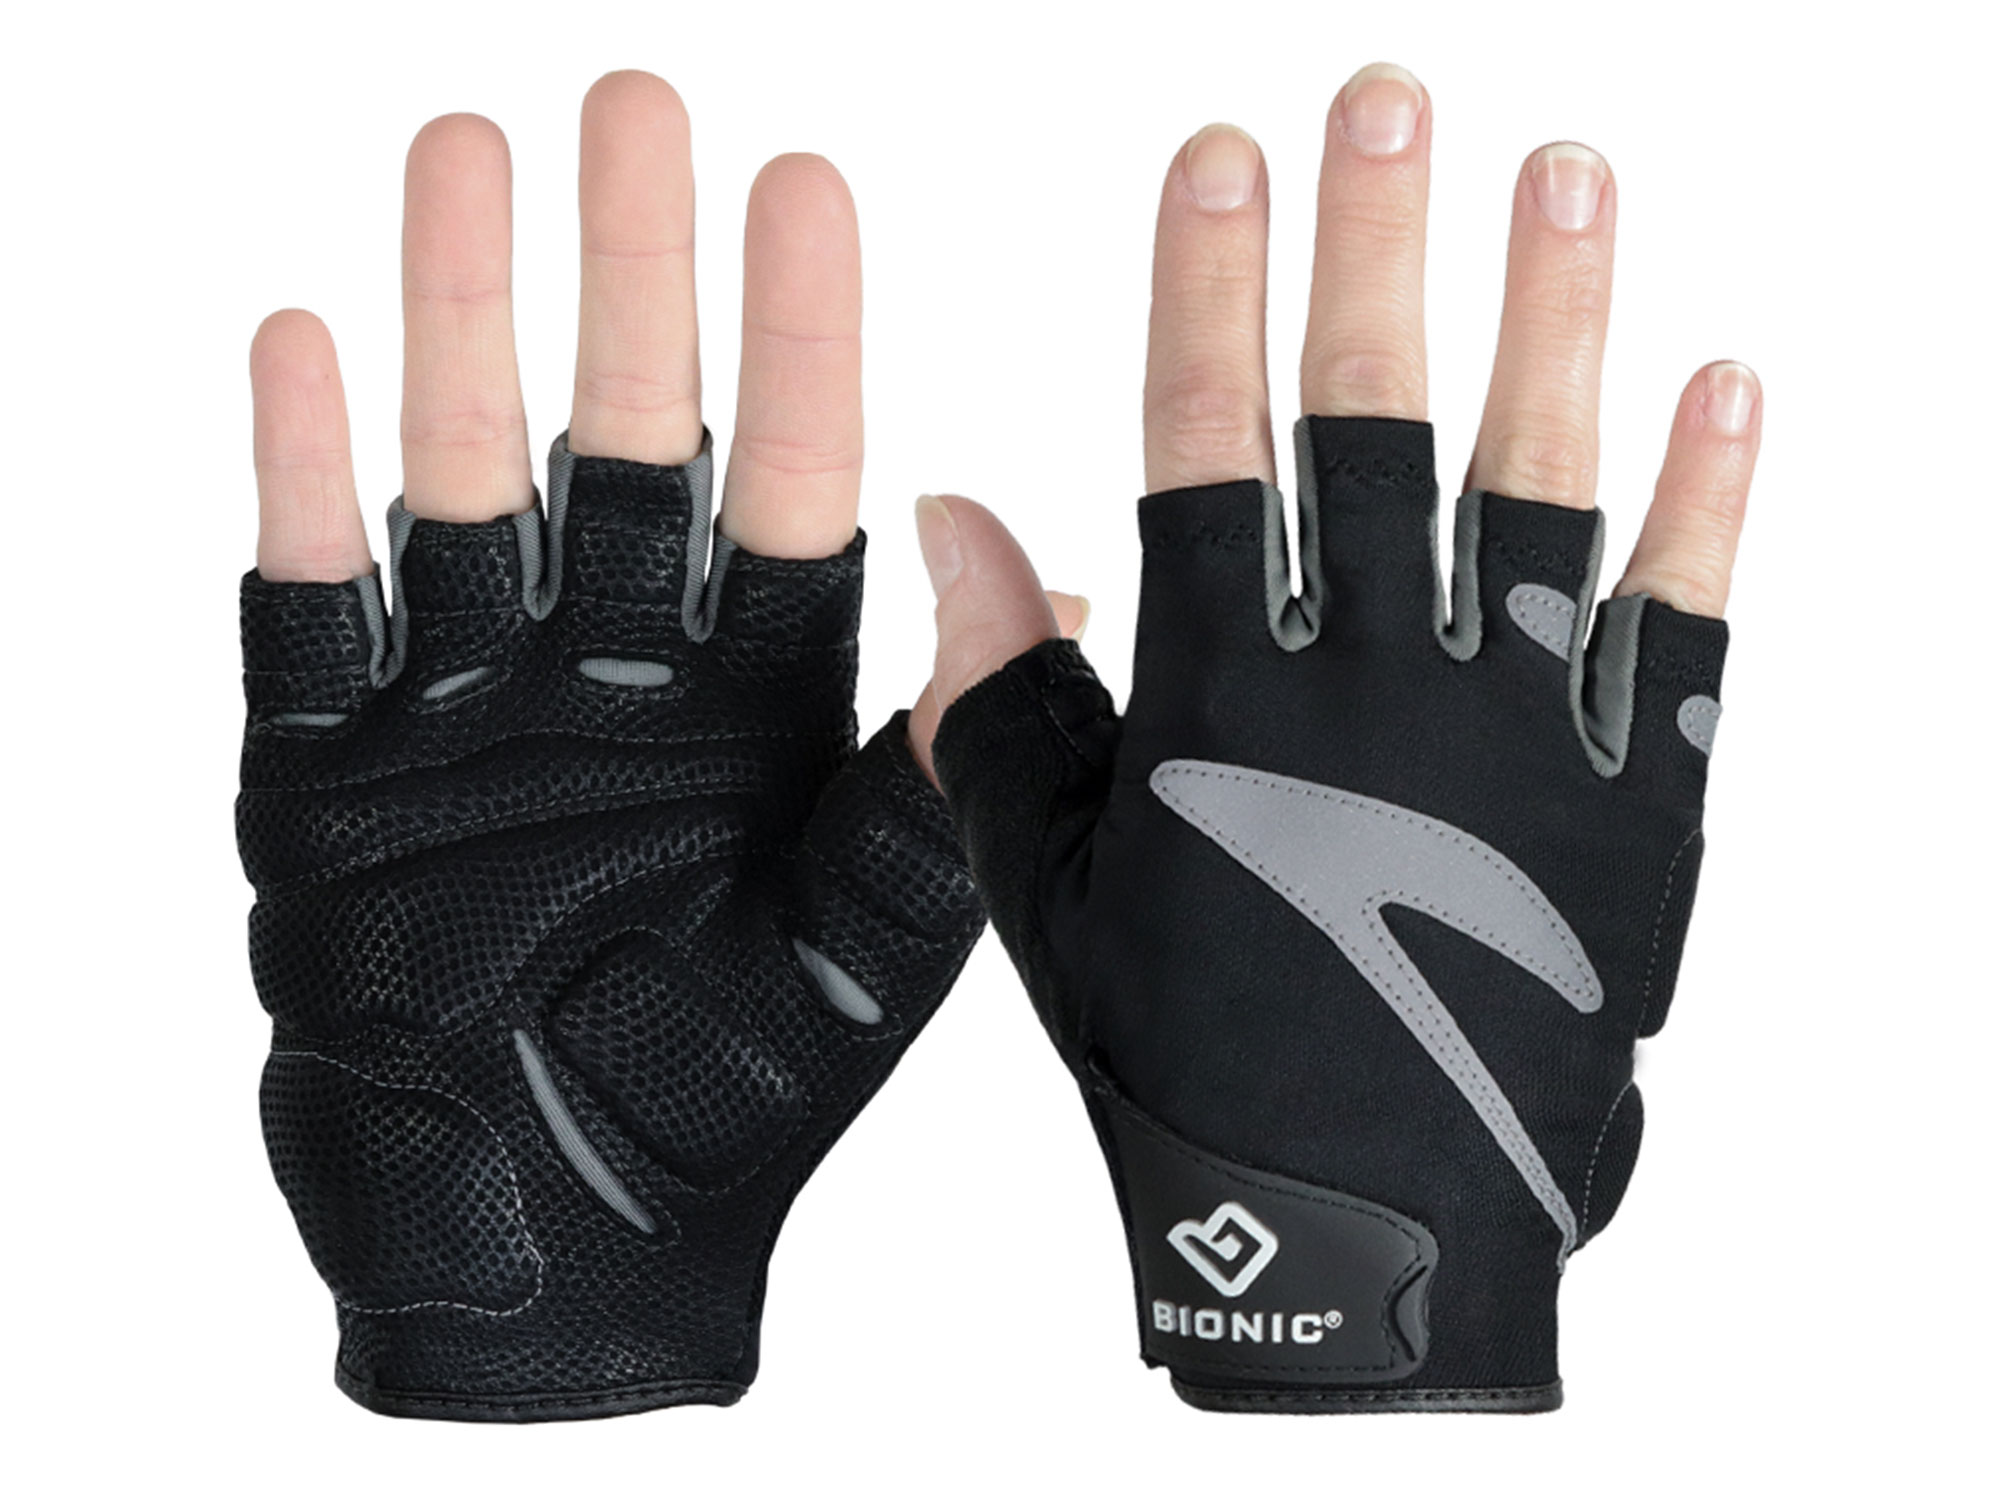 Bionic Cycling Gloves Review